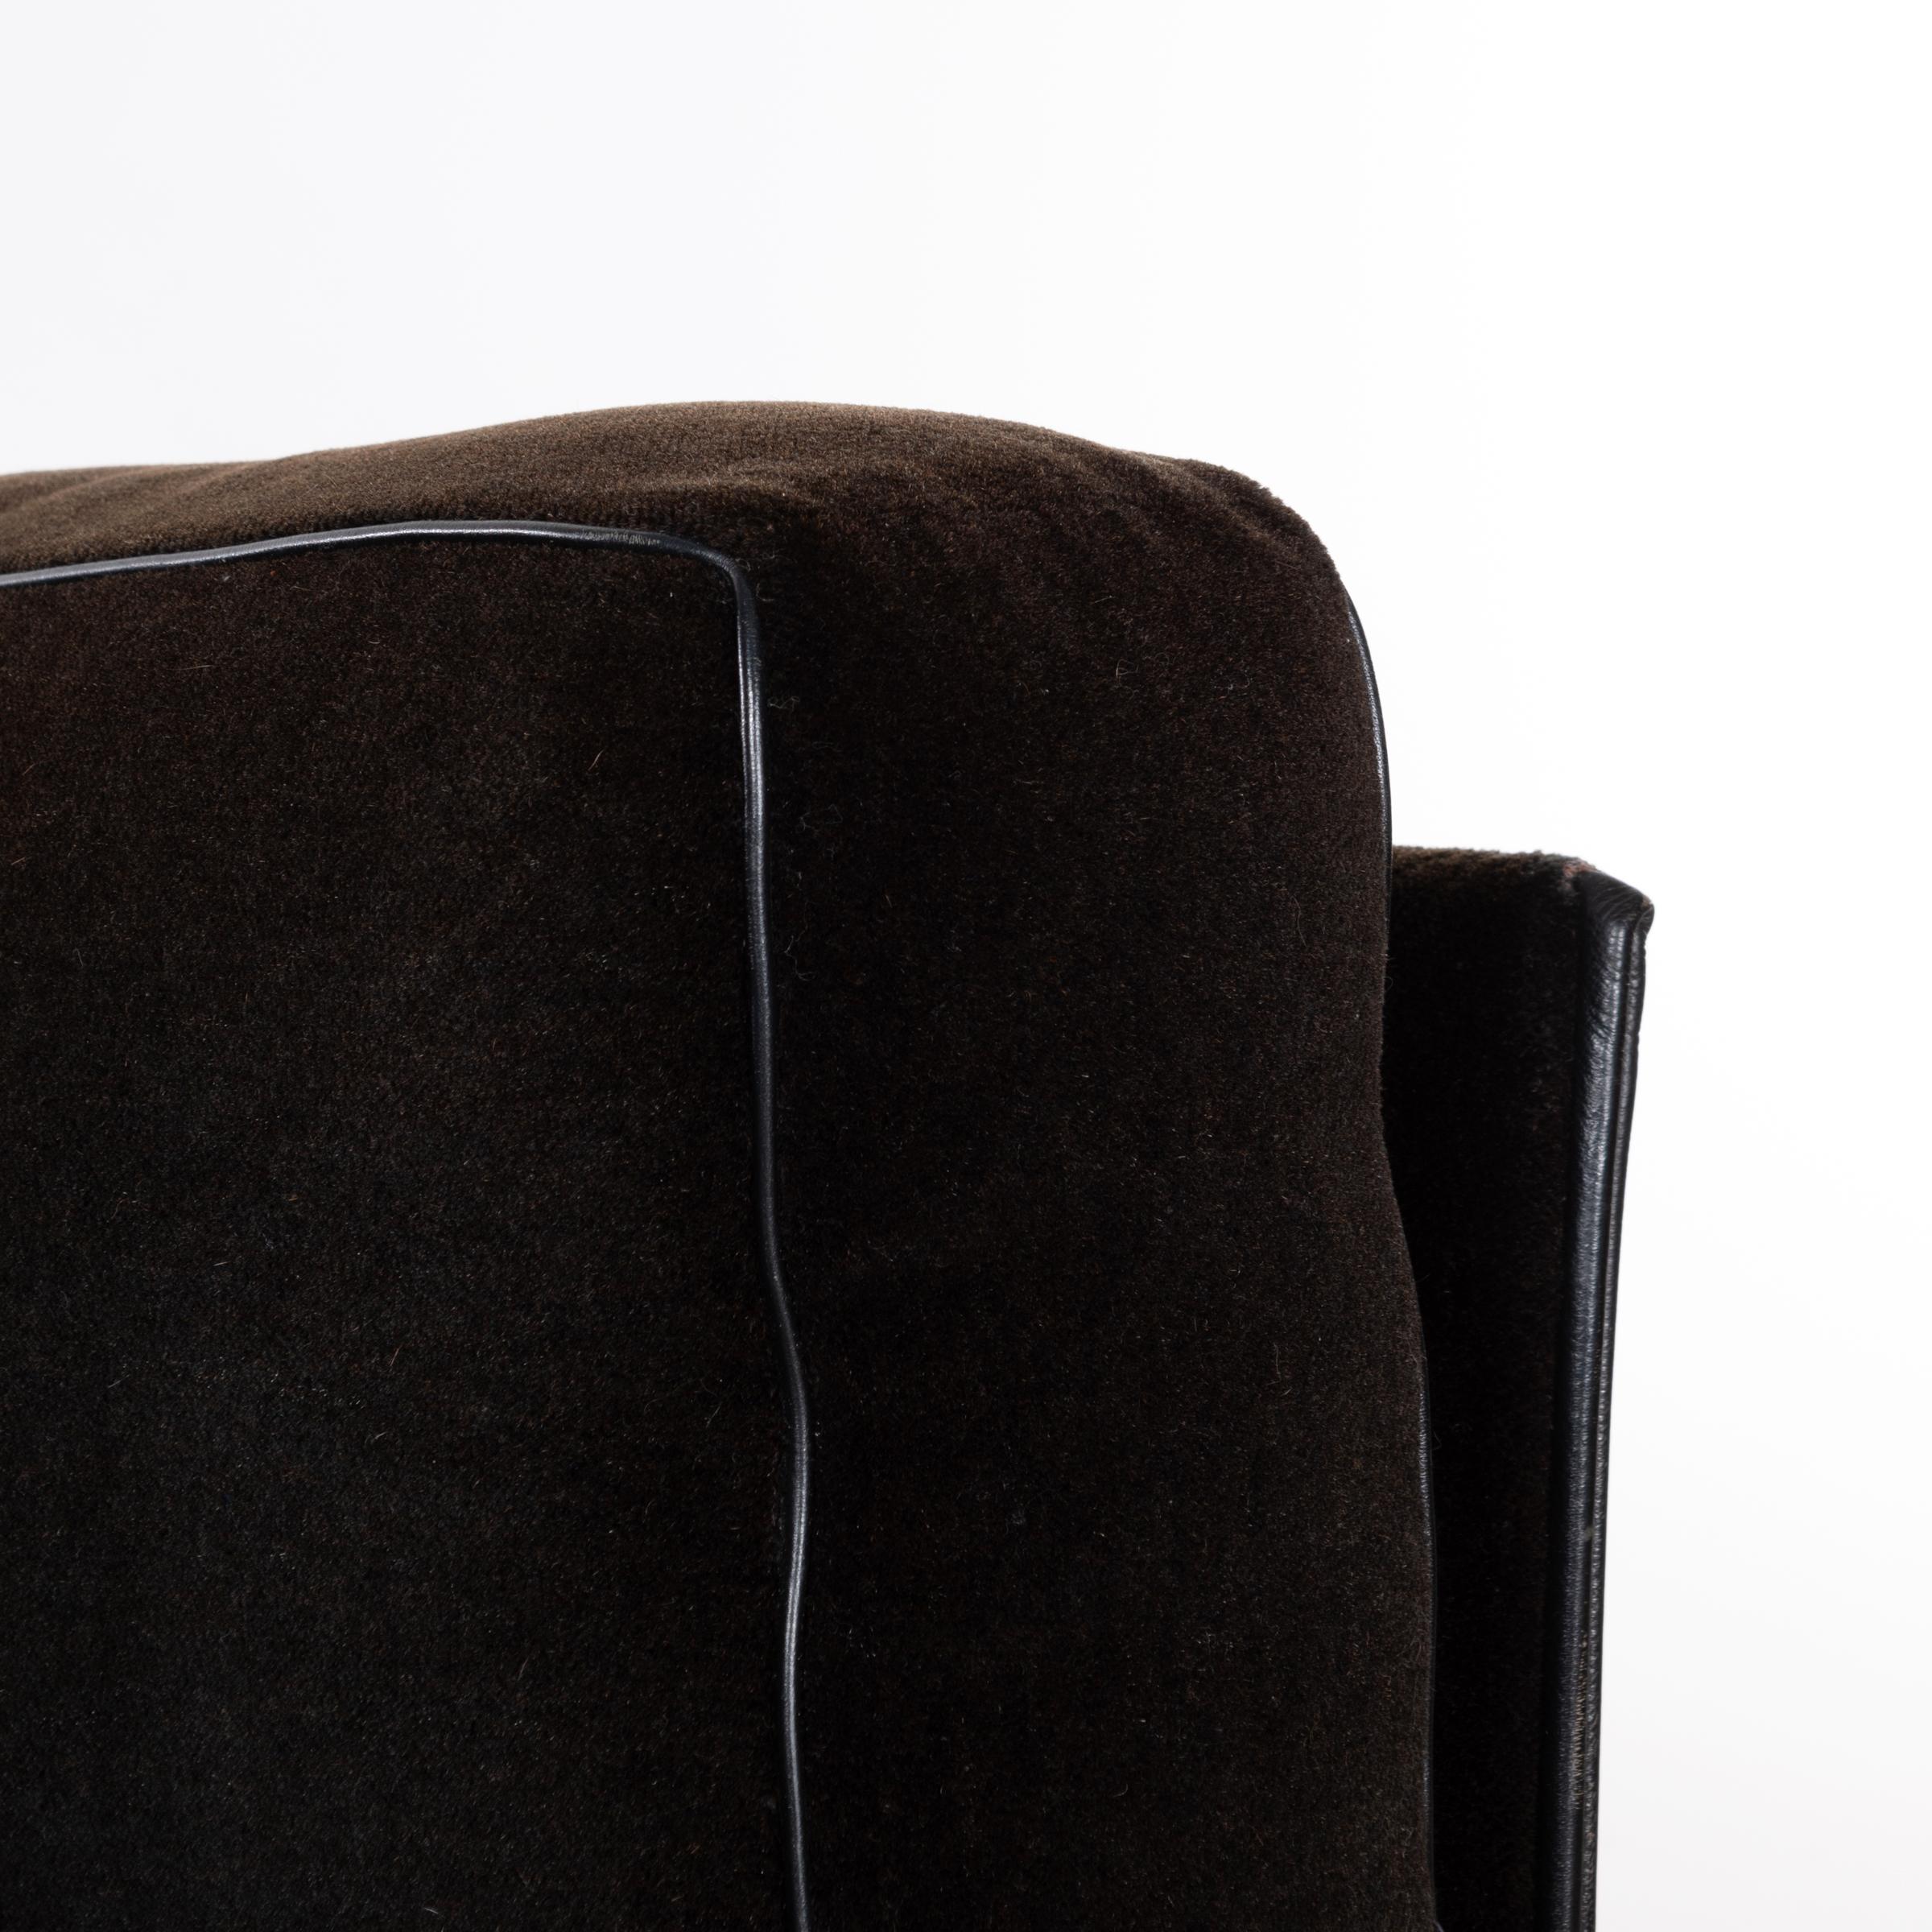 Mario Bellini 405 Duc Lounge Armchairs in Dark Brown Fabric by Cassina, Italy 1